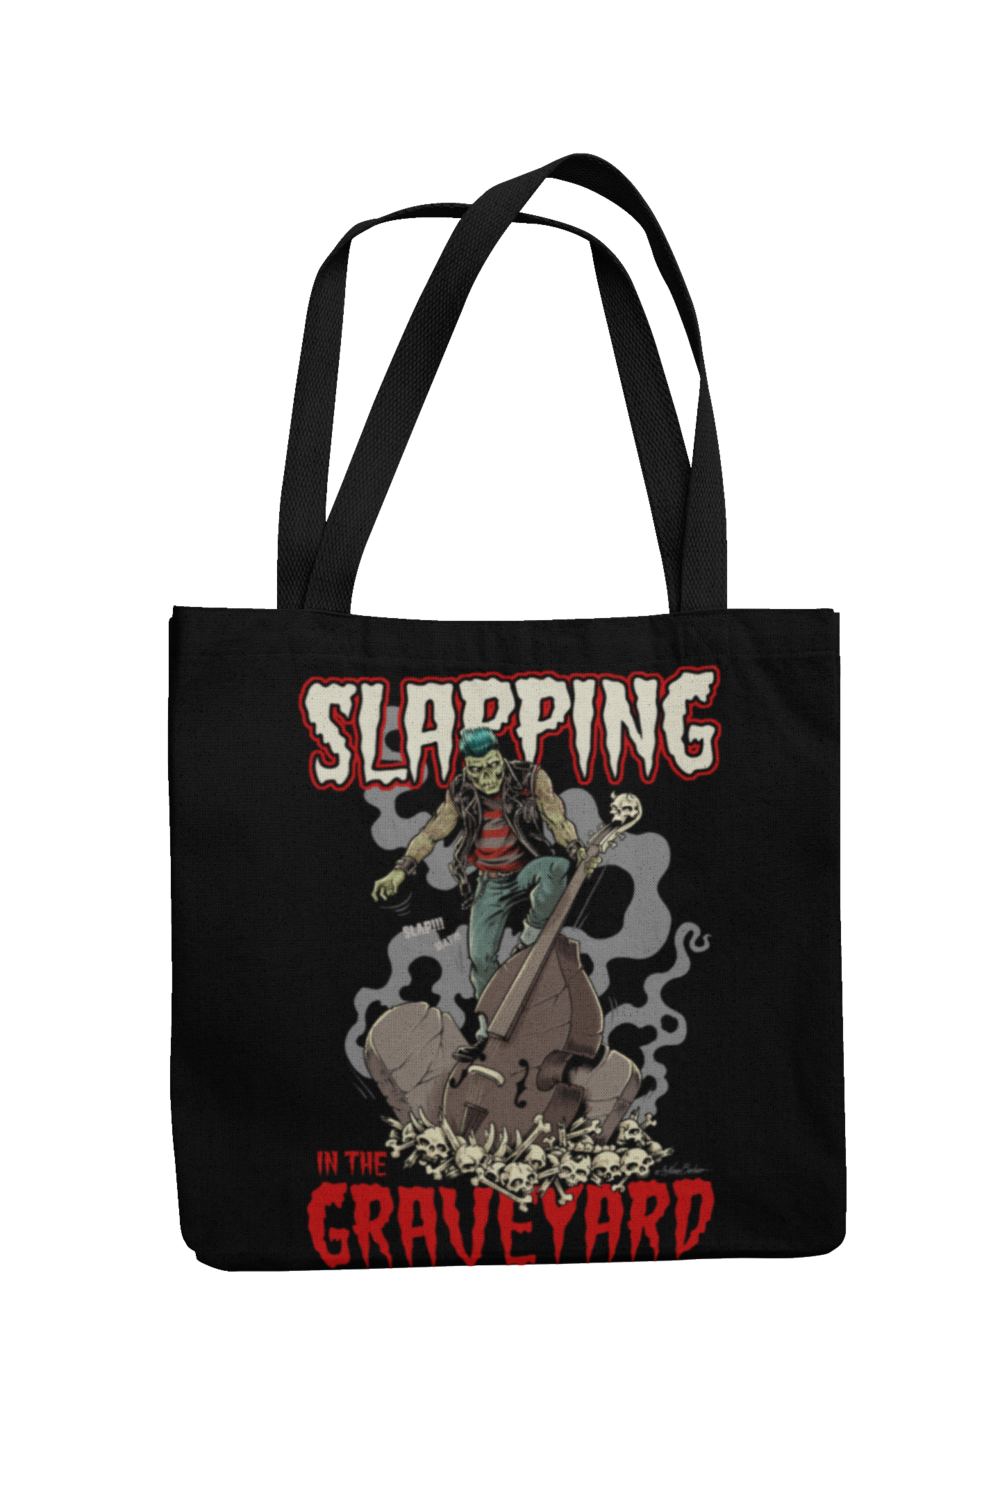 Cotton Bag Slapping in the graveyard design by NANO BARBERO